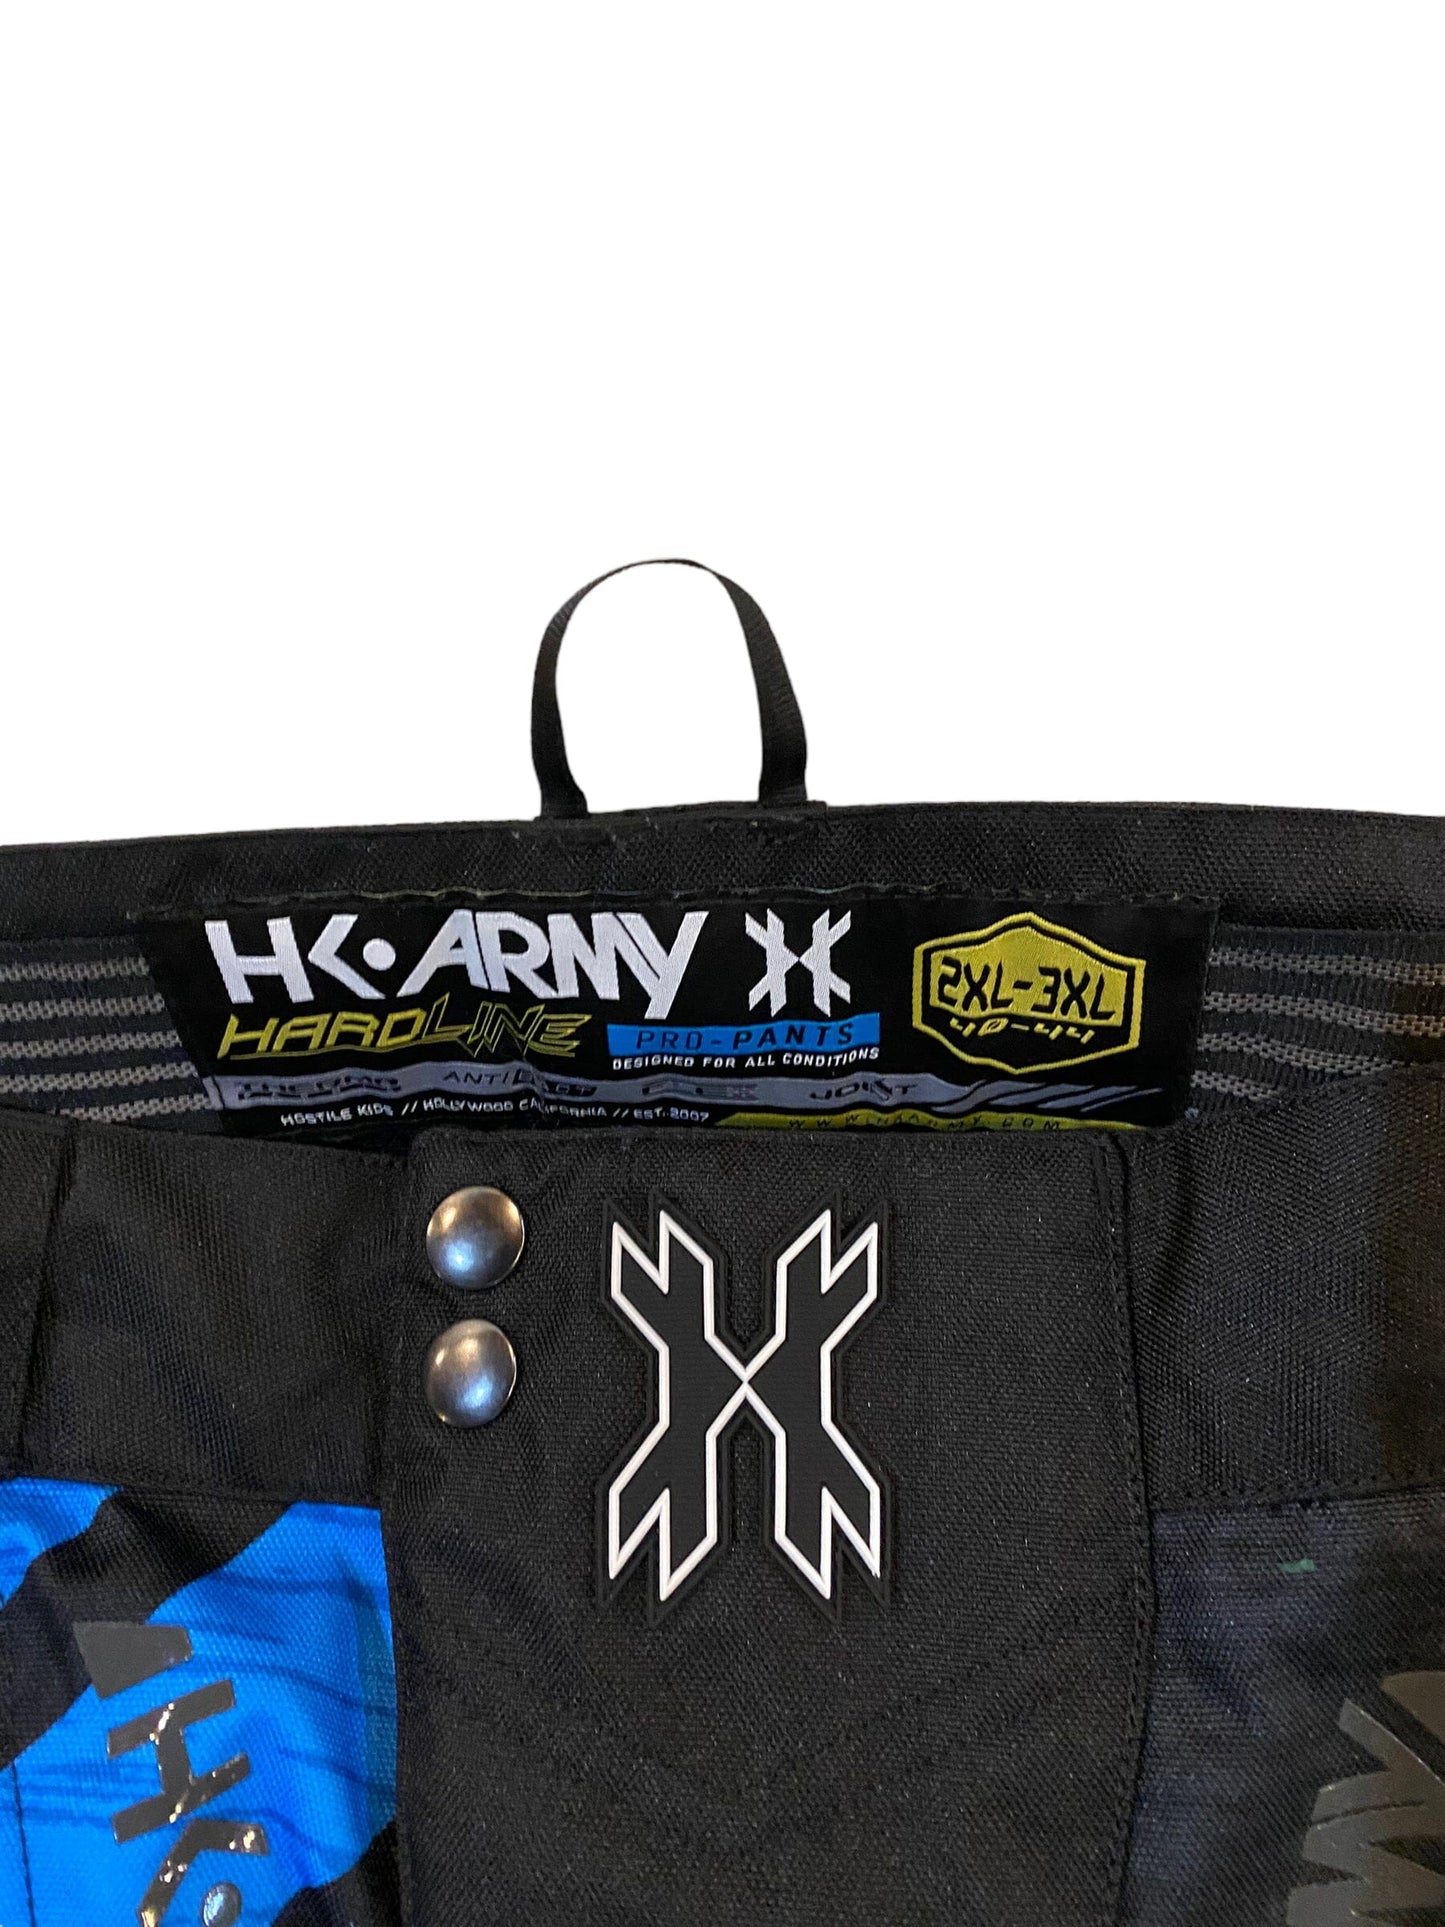 Used HK Army Hardline Pro-Paintball Pants Size 2XL-3XL (40-44) Paintball Gun from CPXBrosPaintball Buy/Sell/Trade Paintball Markers, Paintball Hoppers, Paintball Masks, and Hormesis Headbands